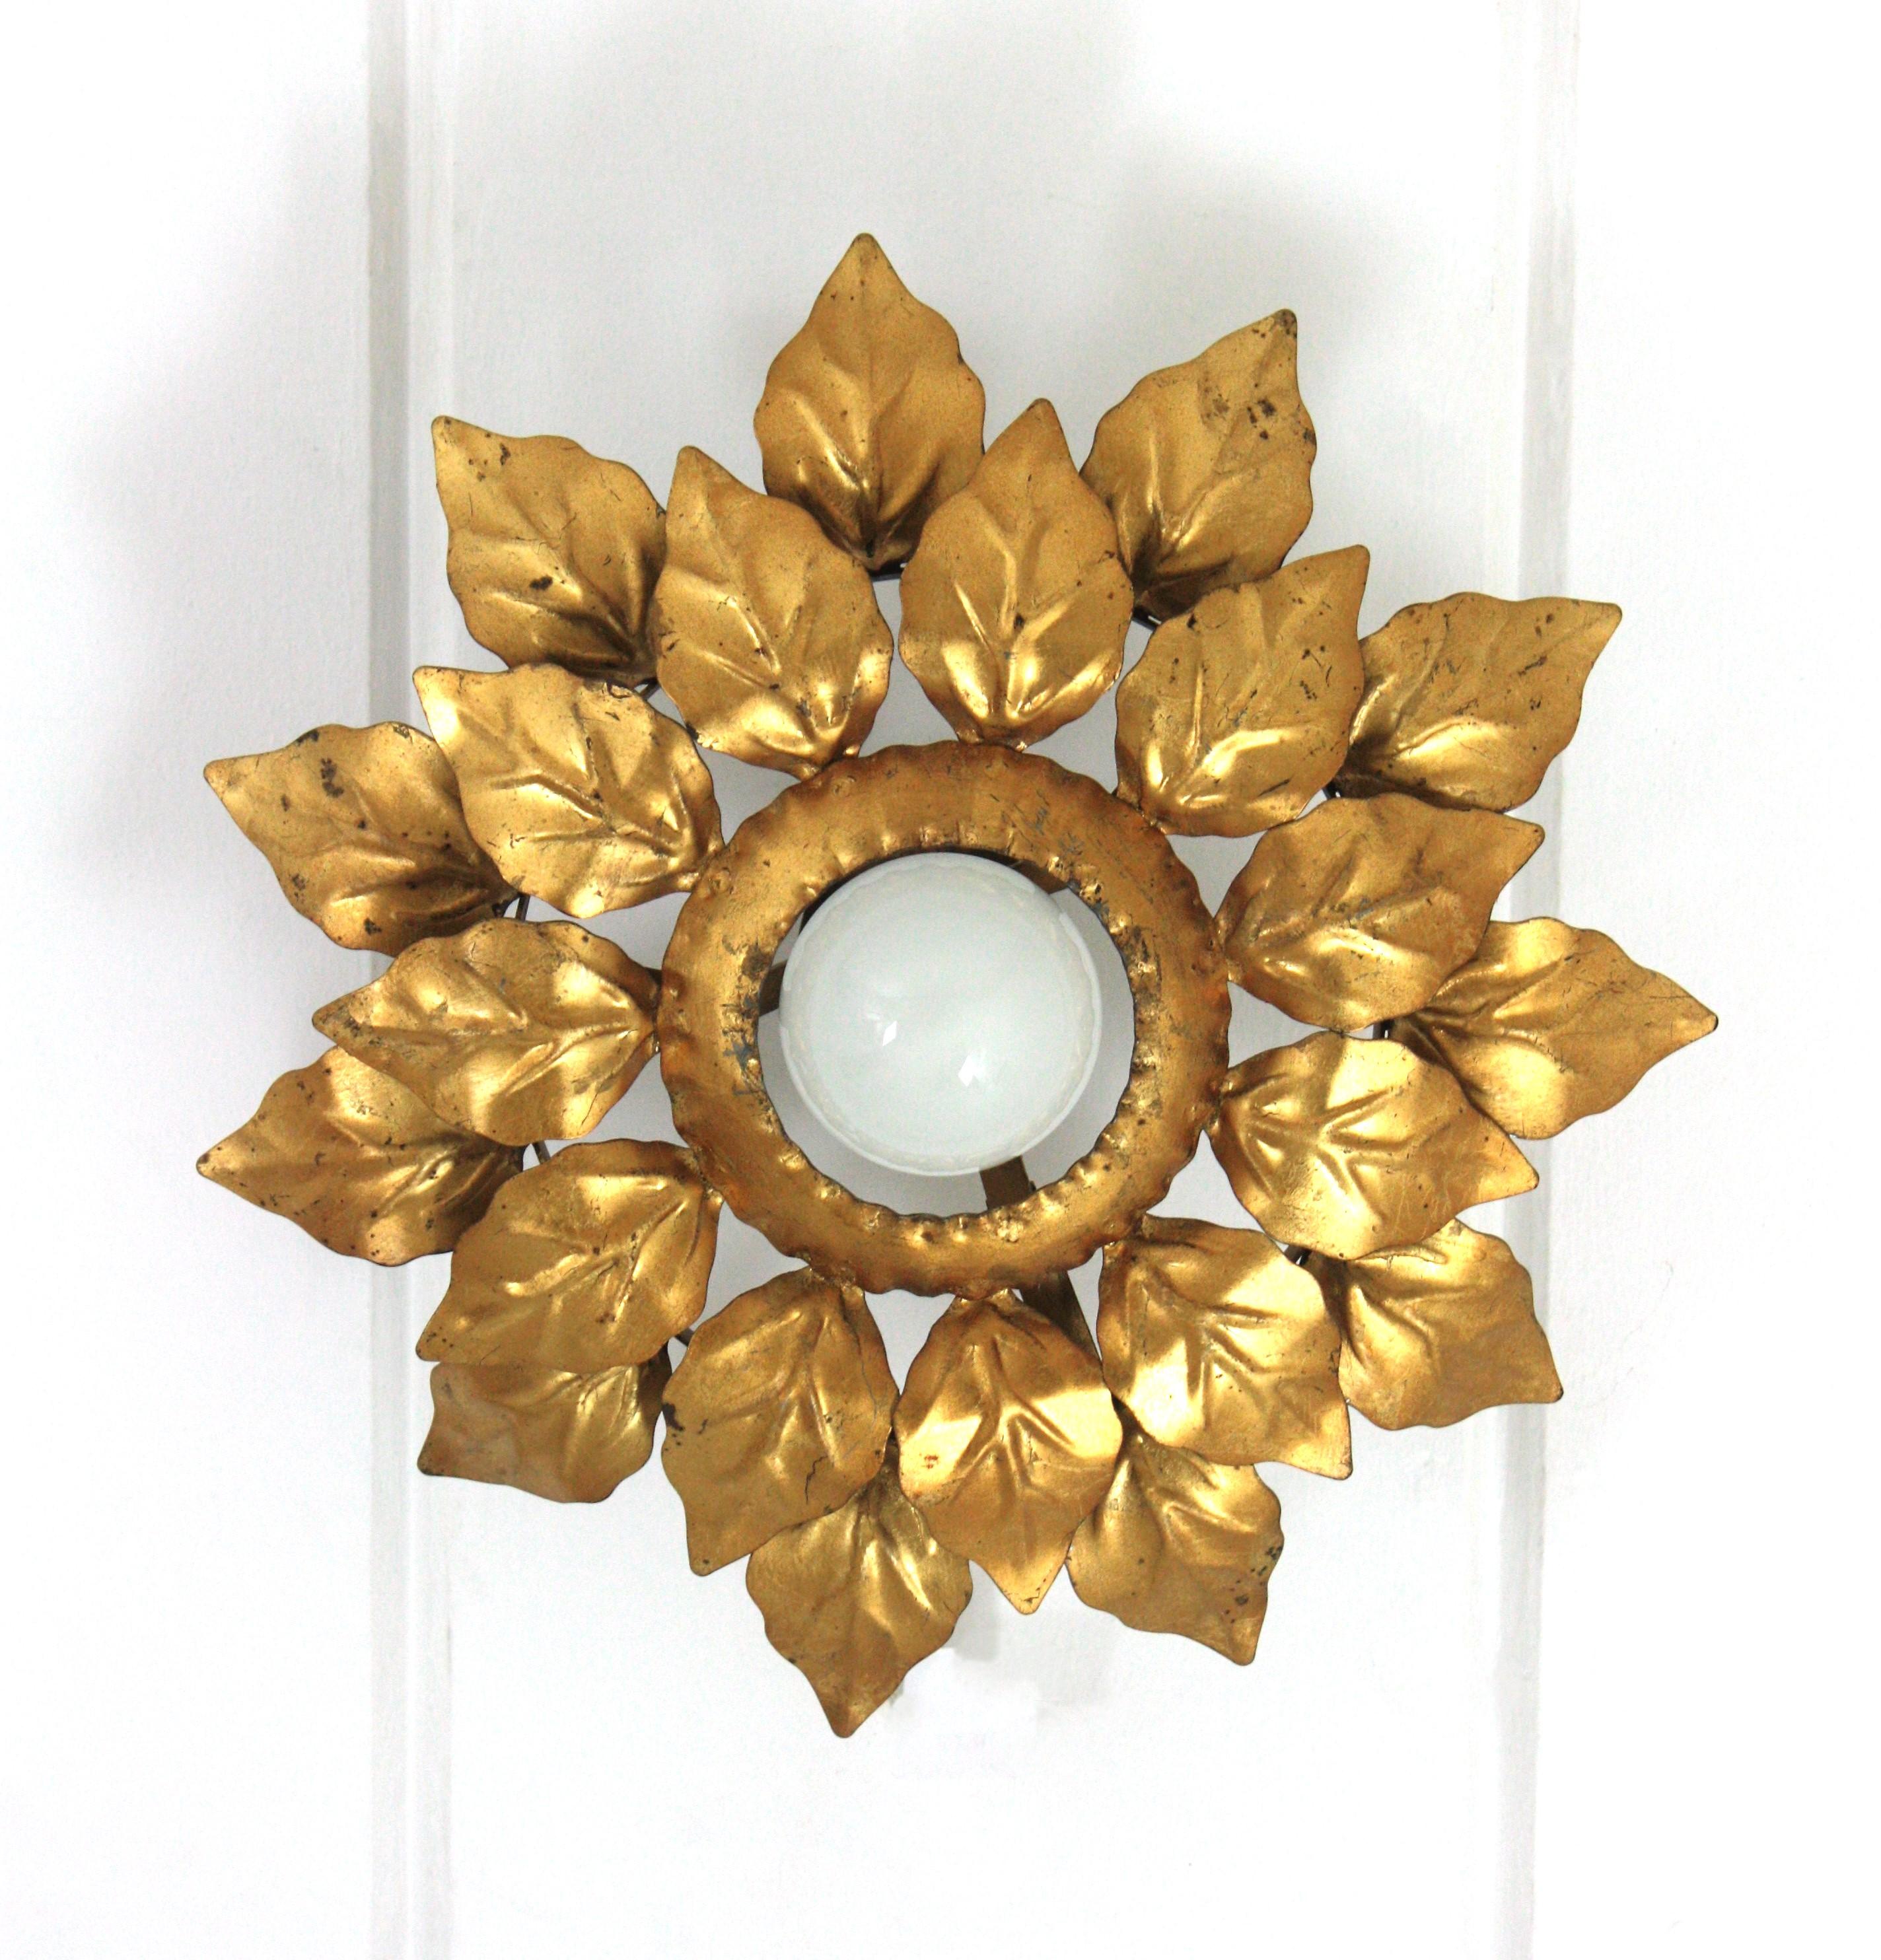 Metal Spanish Sunburst Light Fixture with Double Leafed Frame, Gilt Iron For Sale